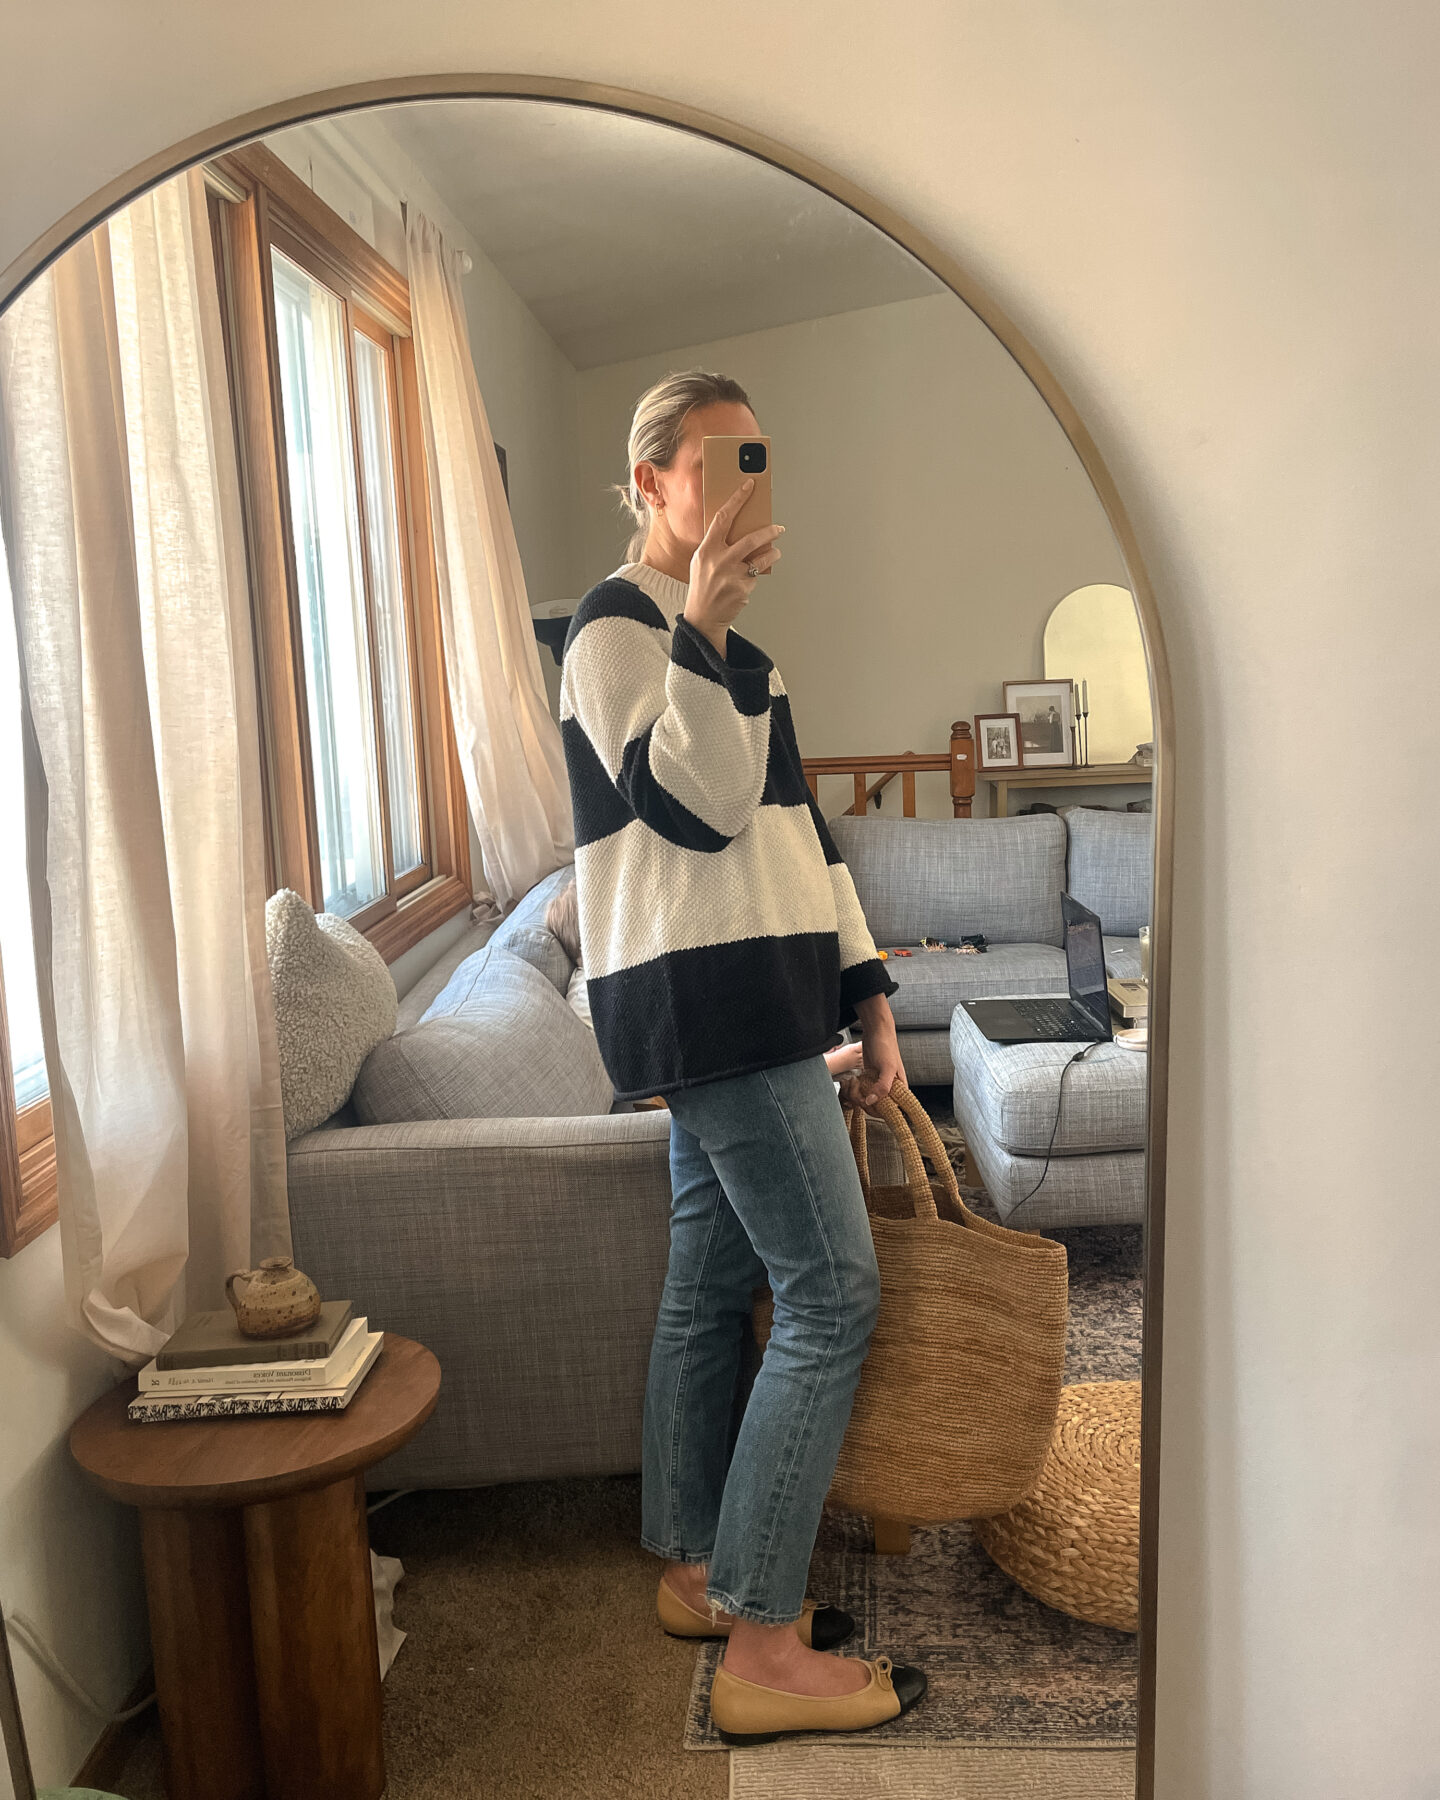 Karin Emily shares a mirror selfie wearing a striped sweater, straight leg jeans and a basket bag